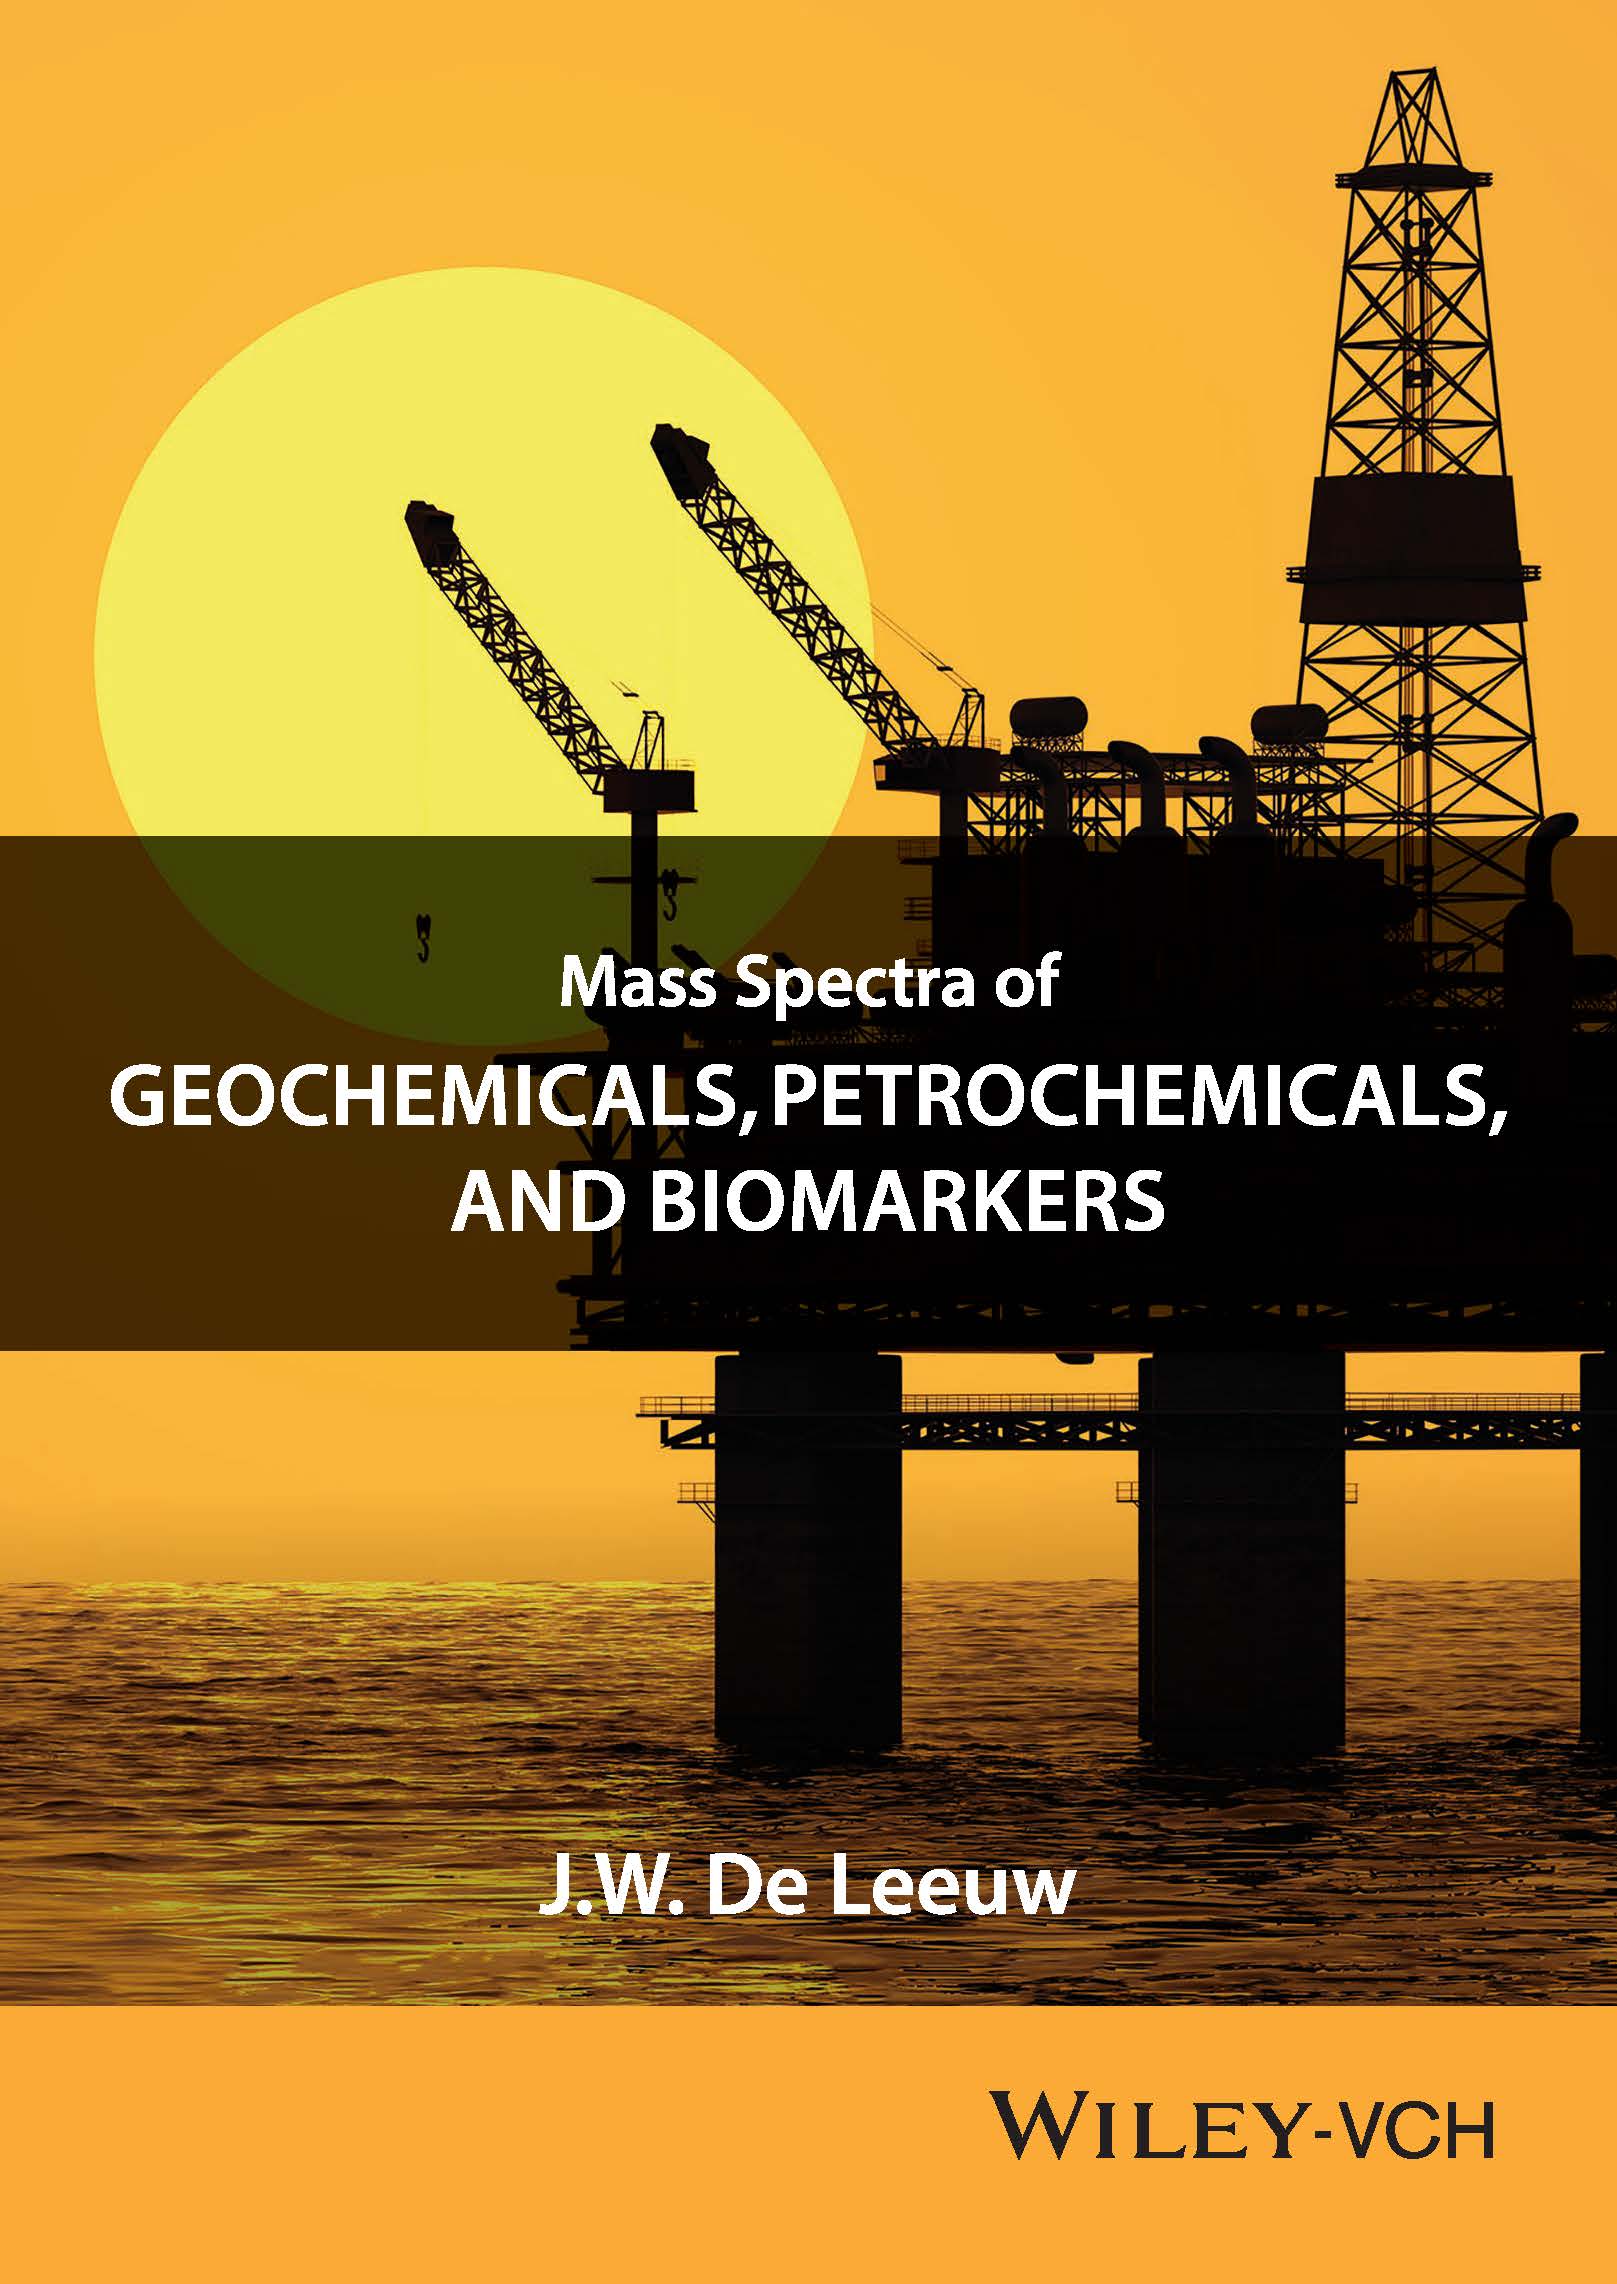 Wiley Mass Spectra of Geochemicals, Petrochemicals and Biomarkers